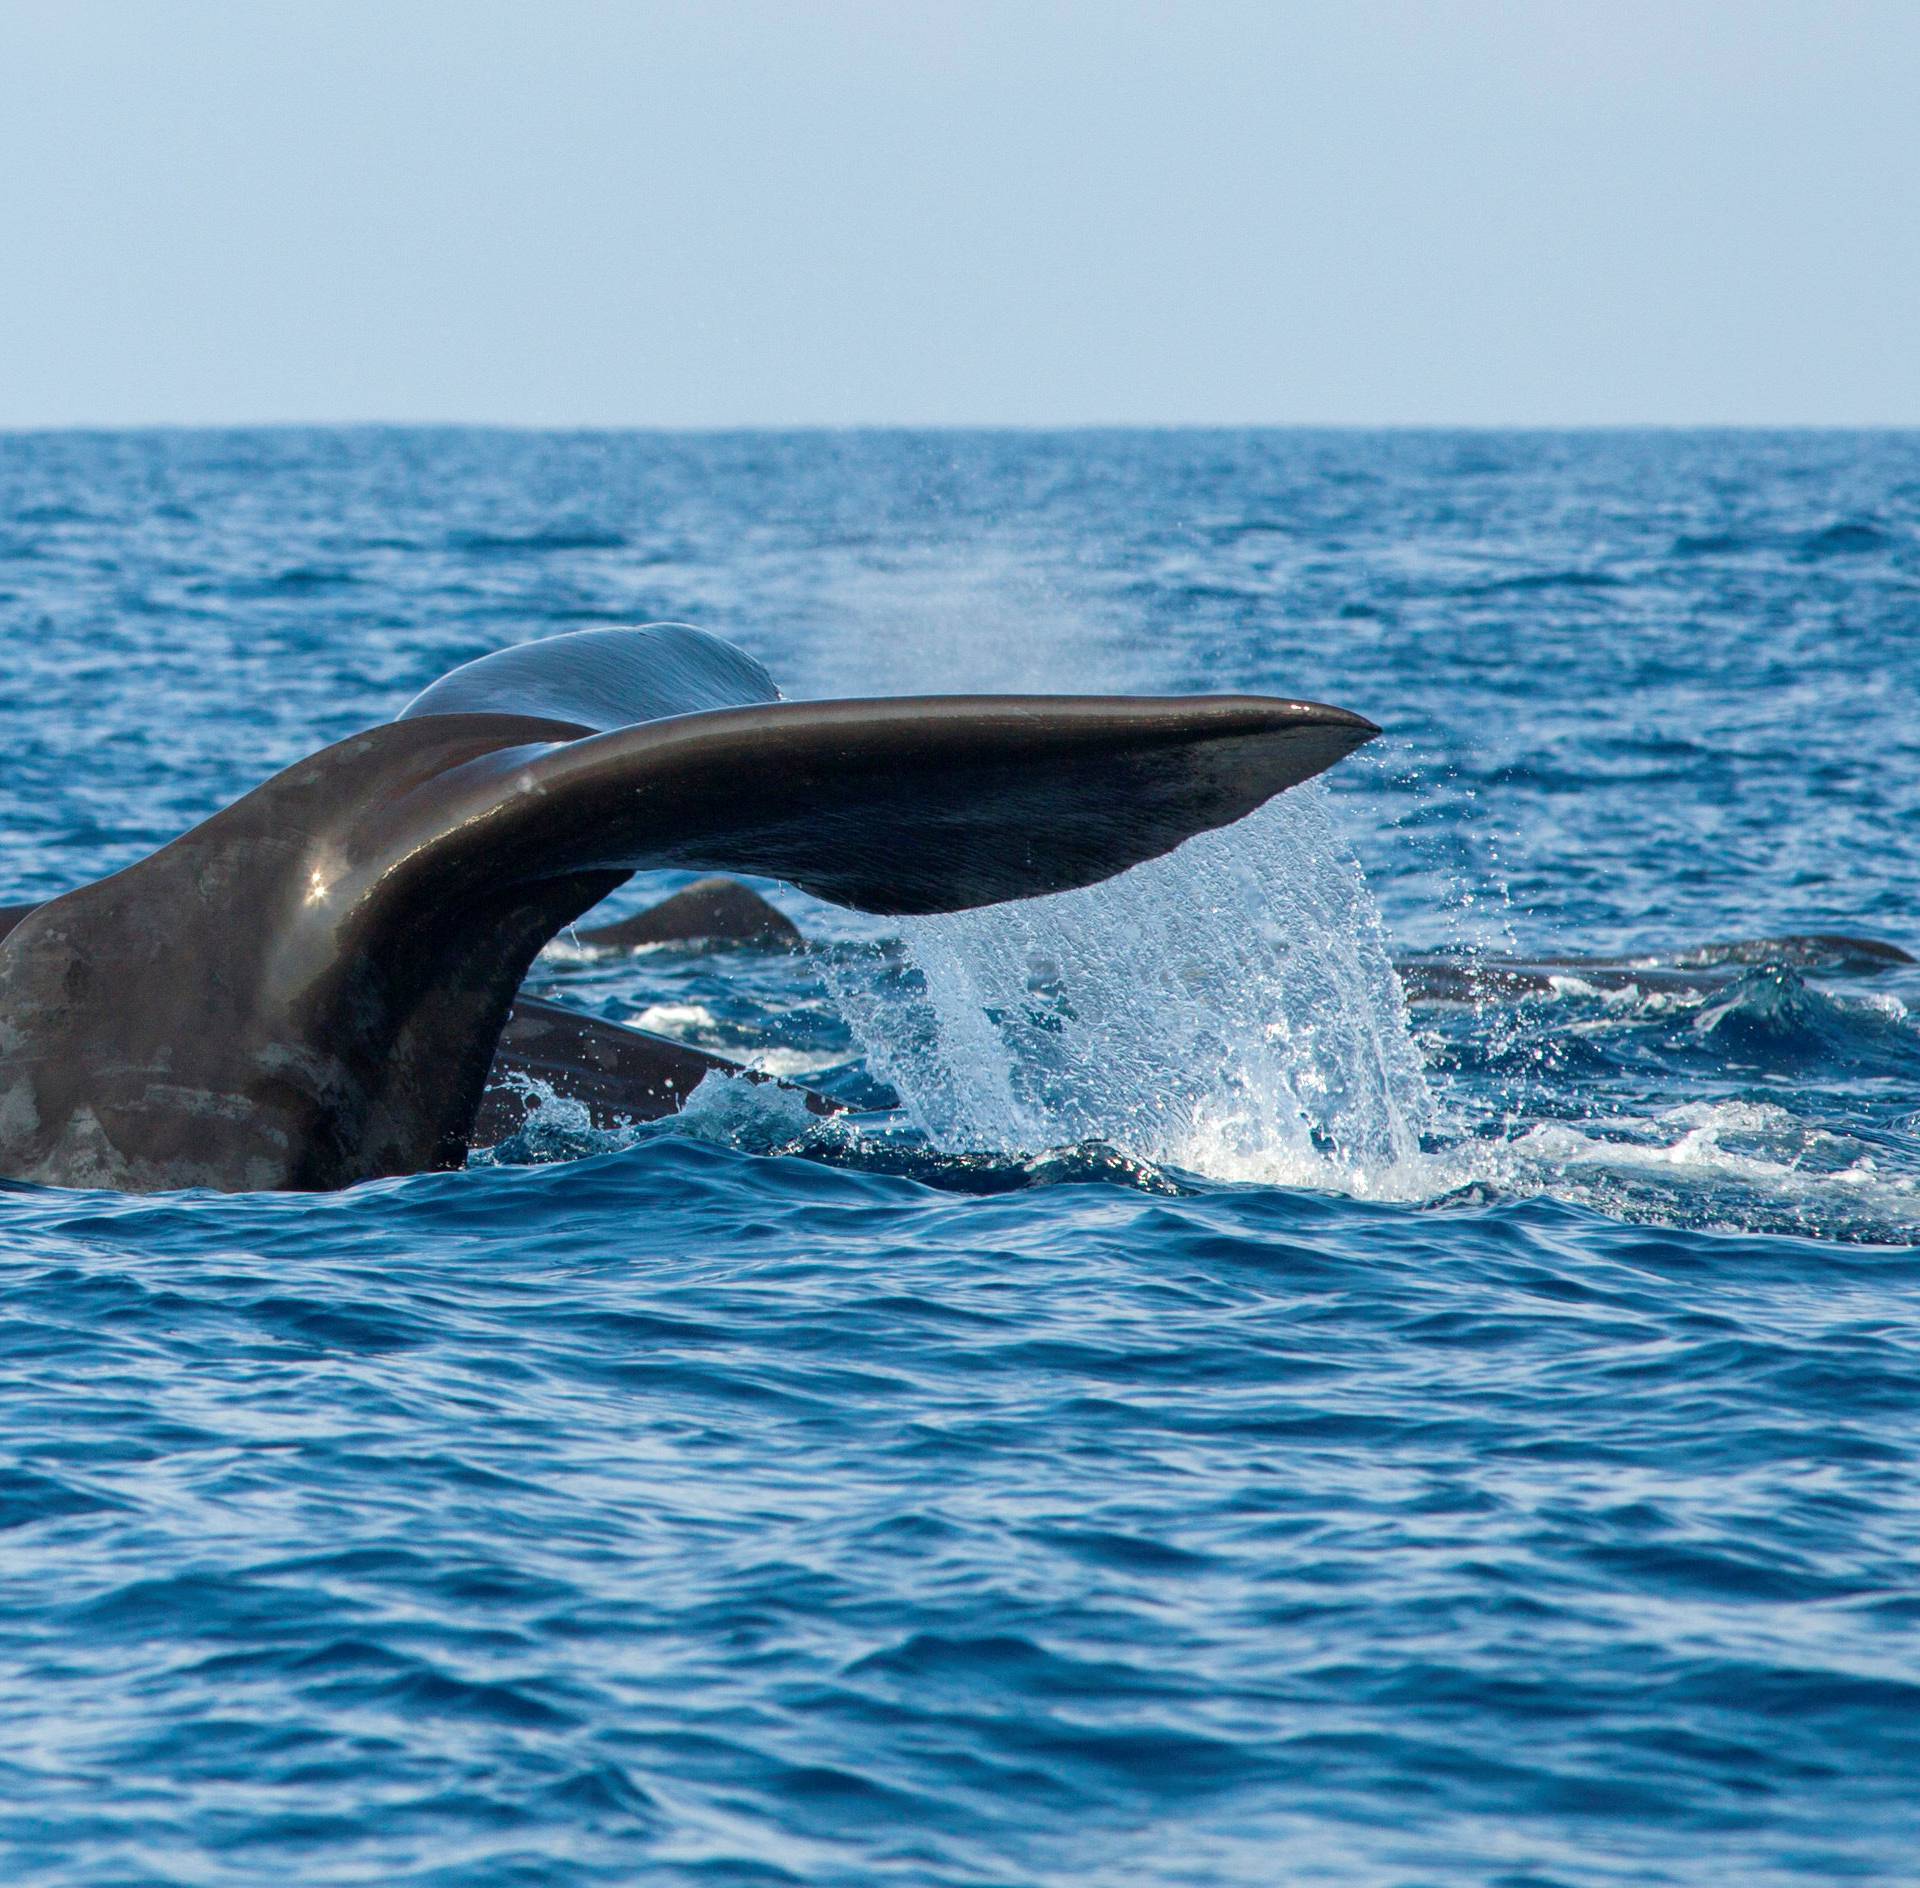 The fluke of a sperm whale sticks out of the sea as it dives among other resting whales off the coast of Mirissa